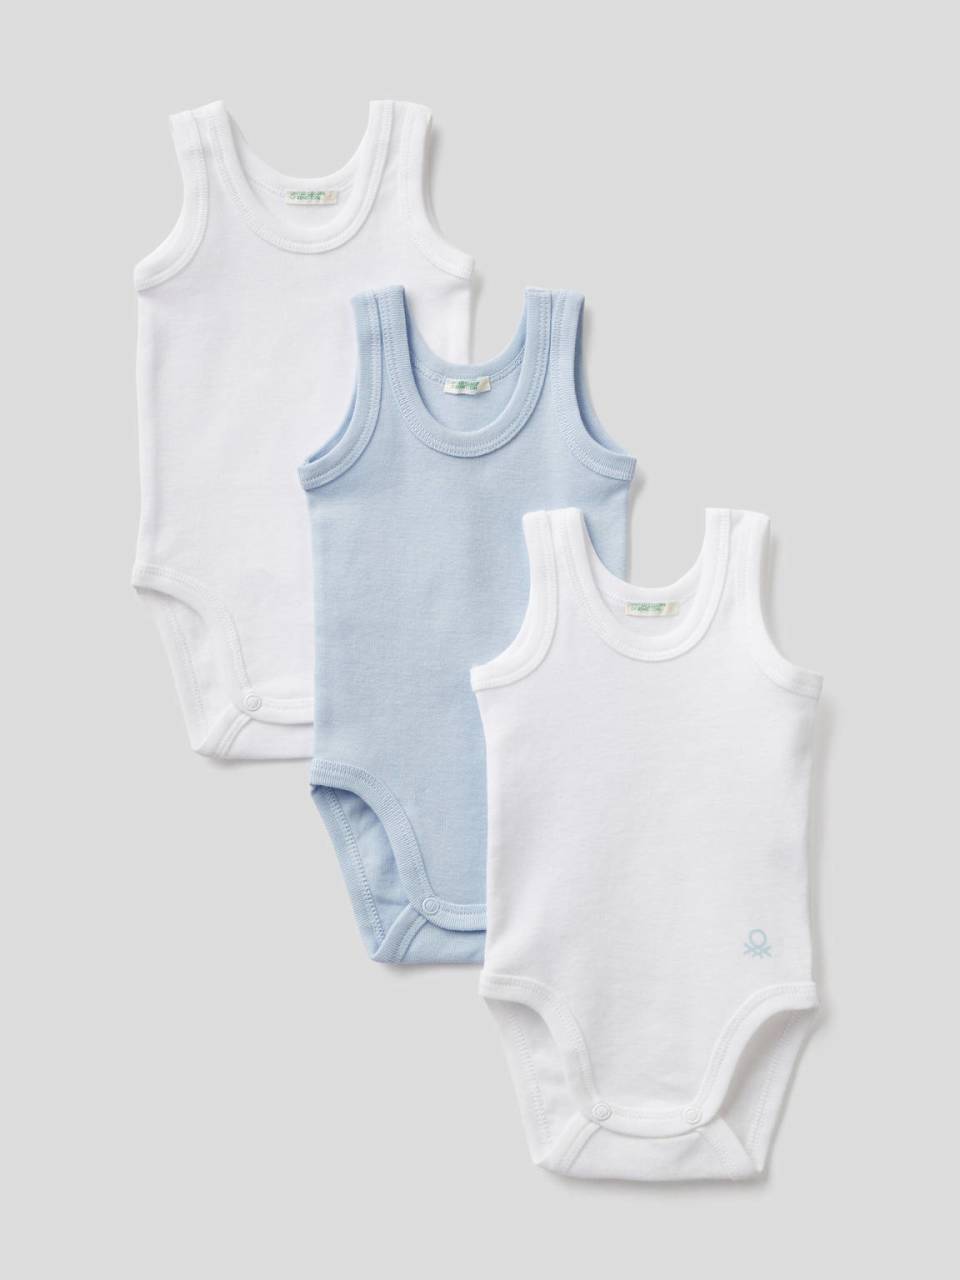 Benetton Three solid color tank top bodysuits. 1